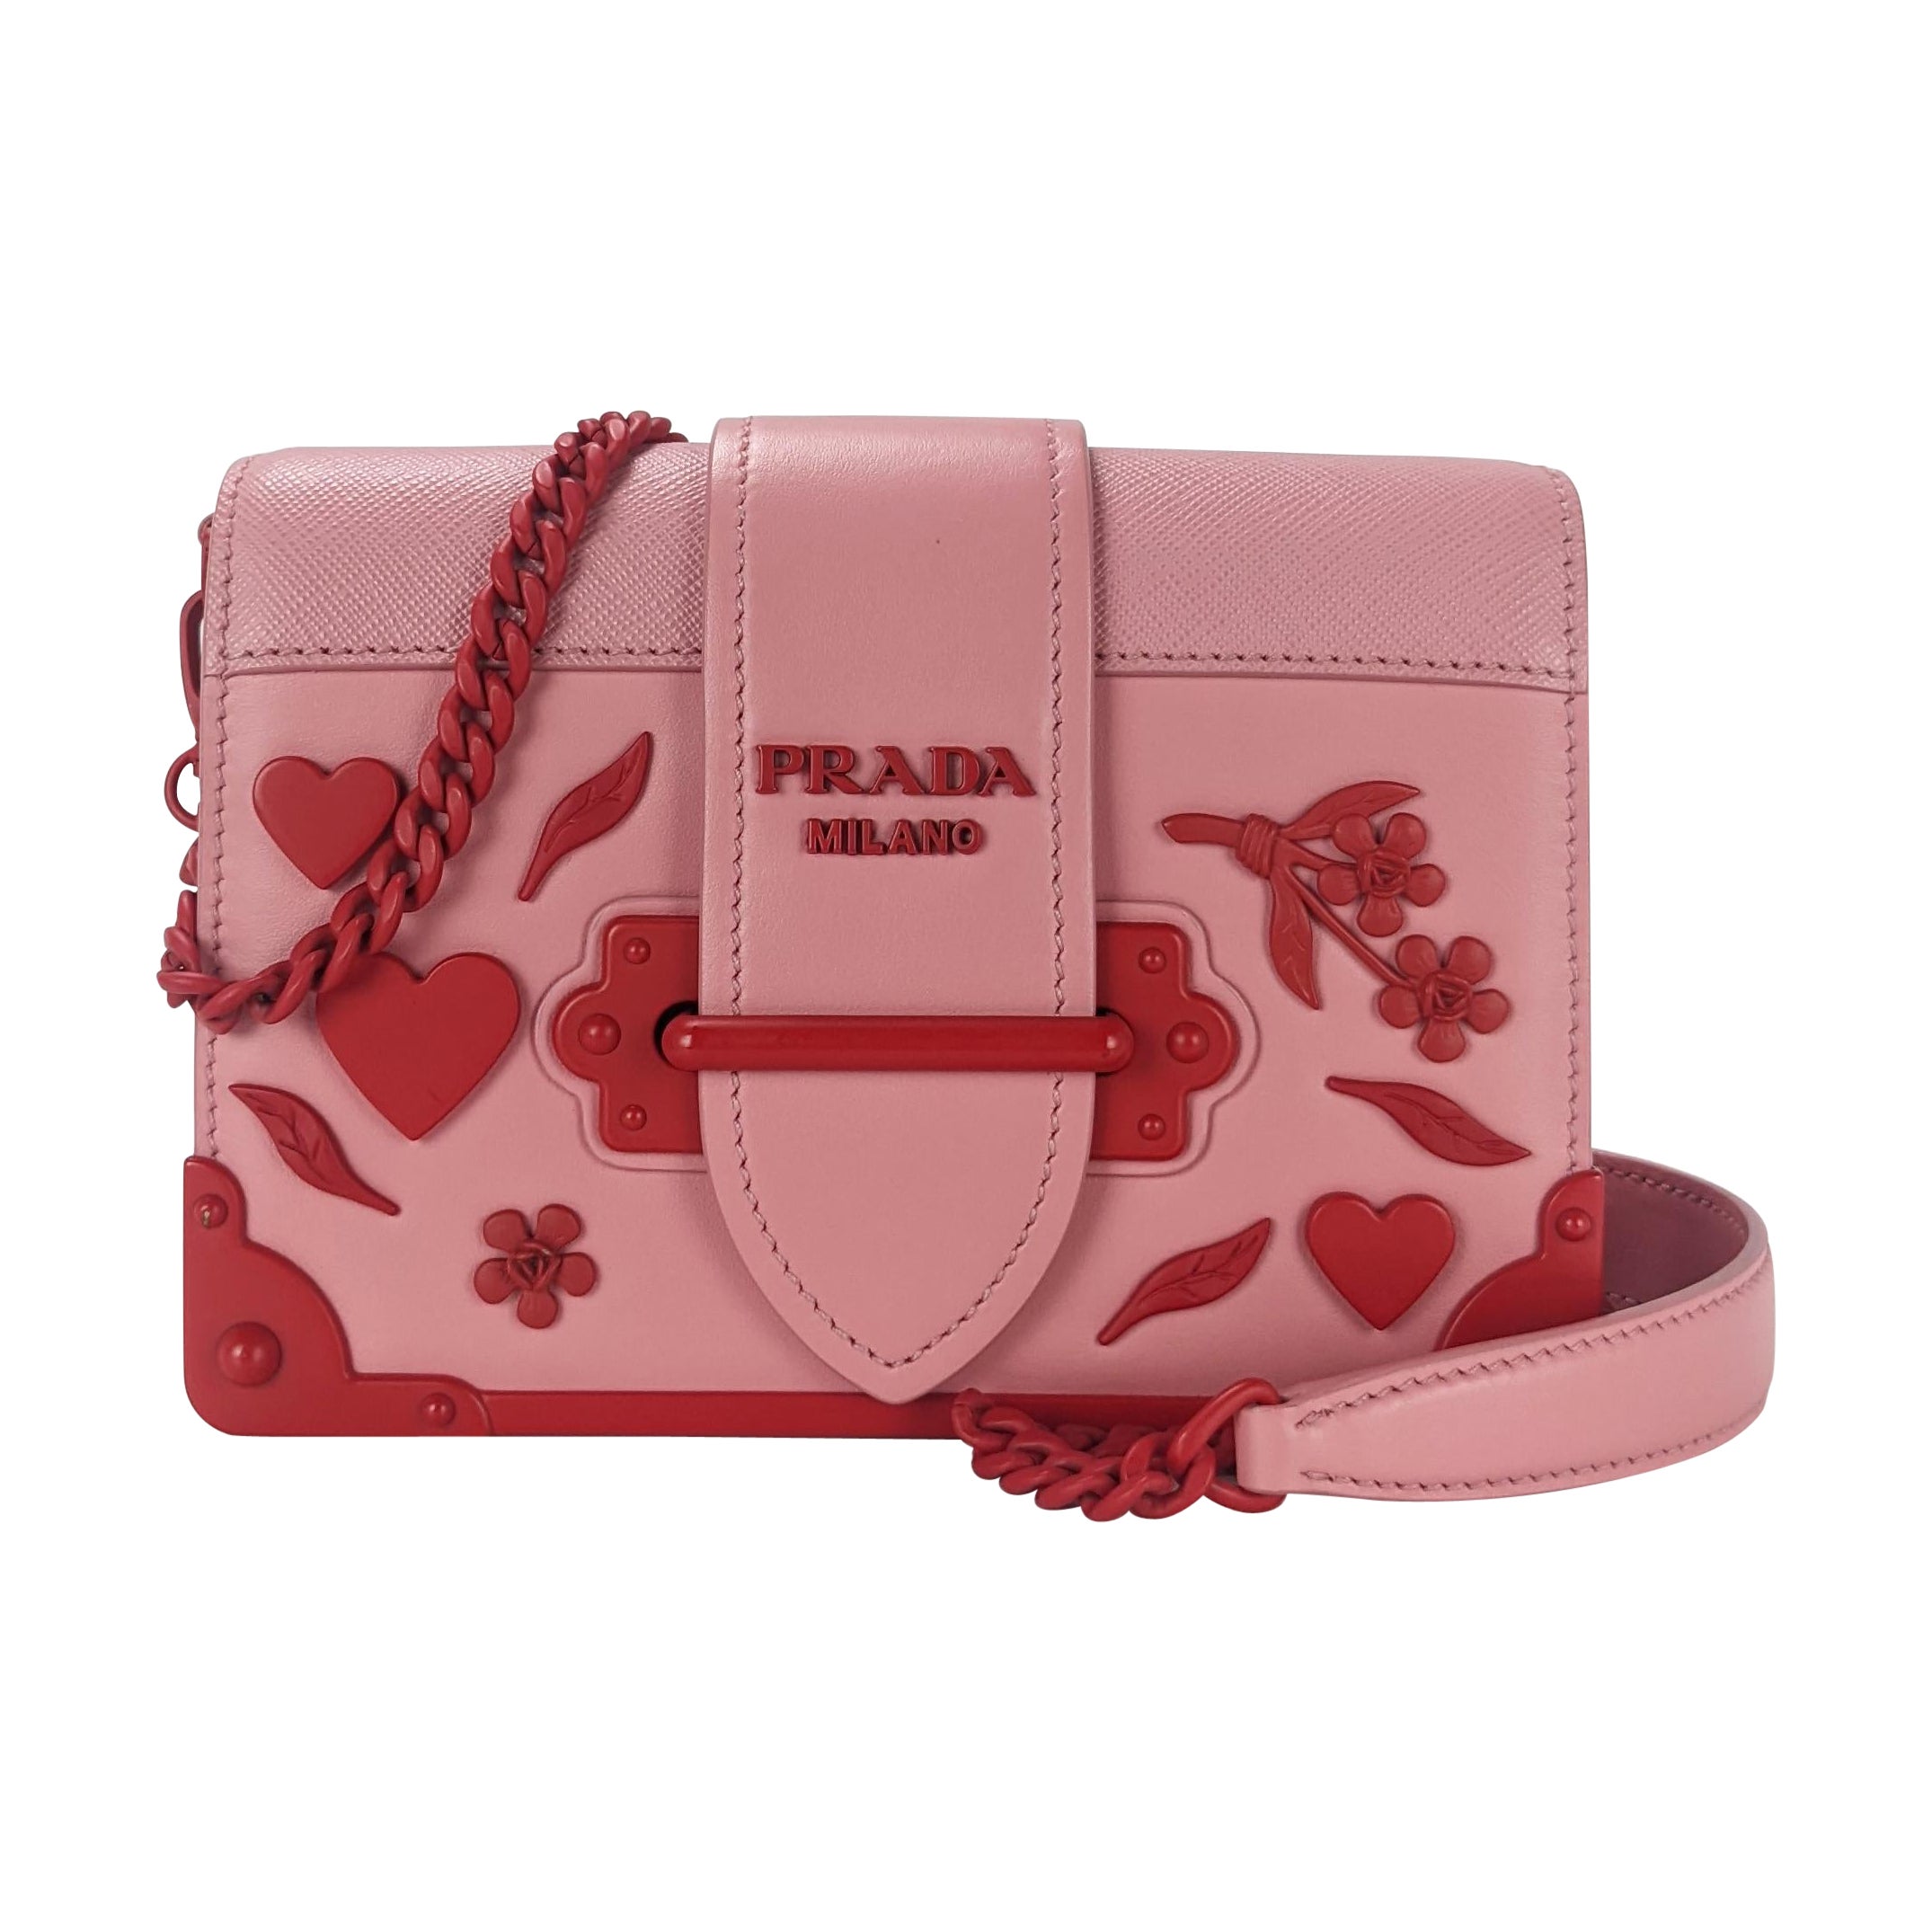 Prada Cahier Red Flower Heart Studded Small Pink Leather Crossbody Bag